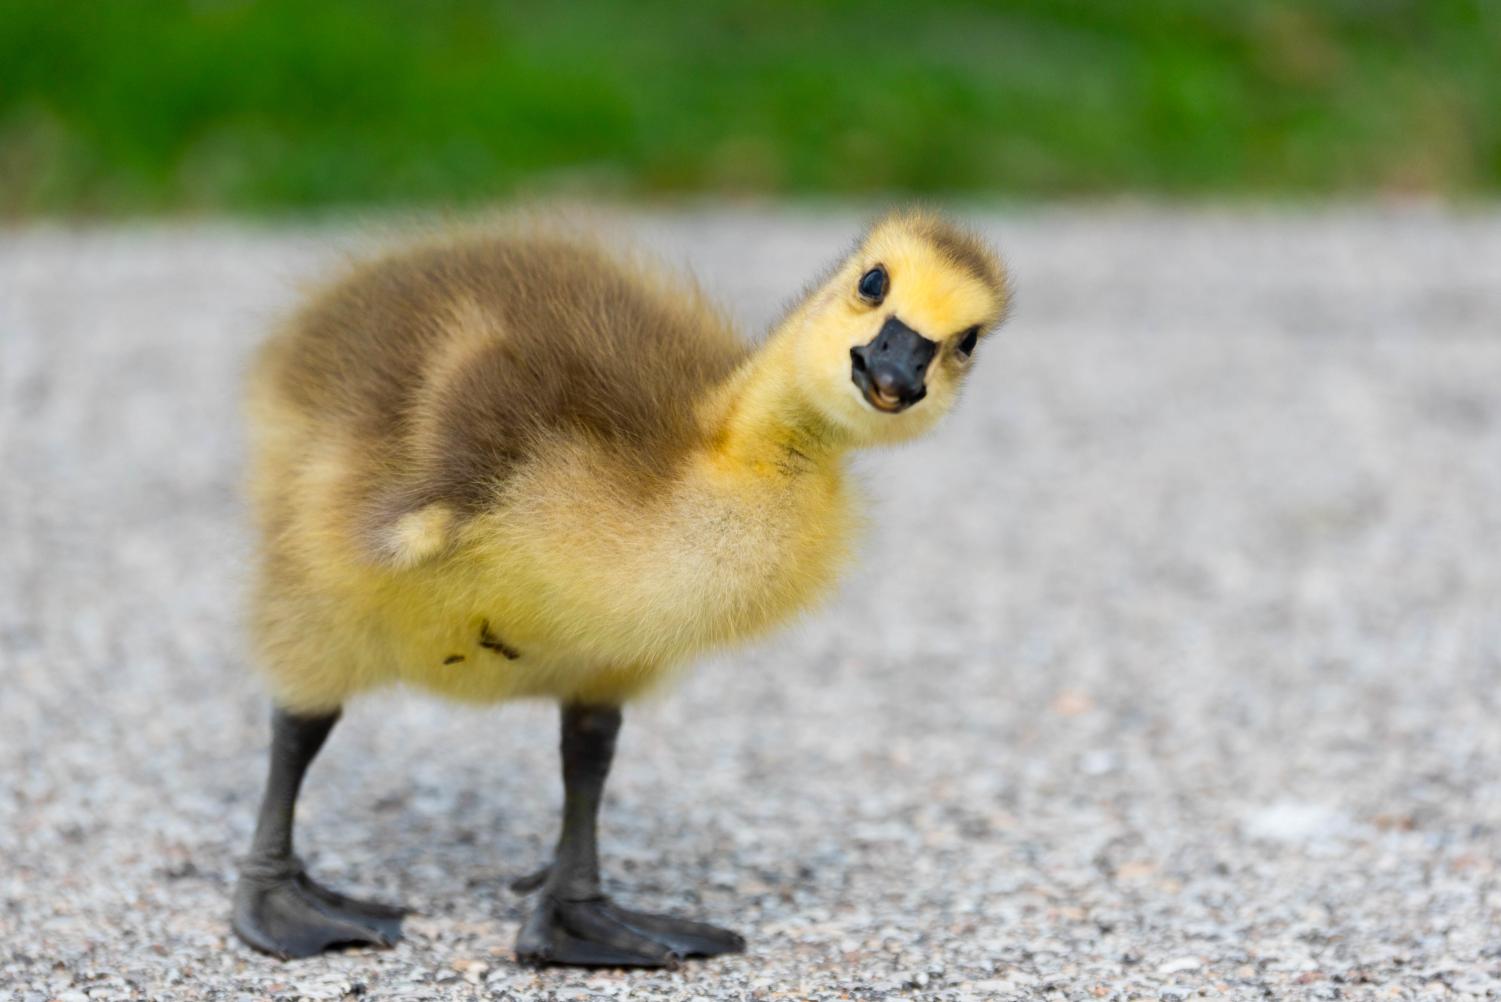 A young gosling standing on pavement looks at the camera.